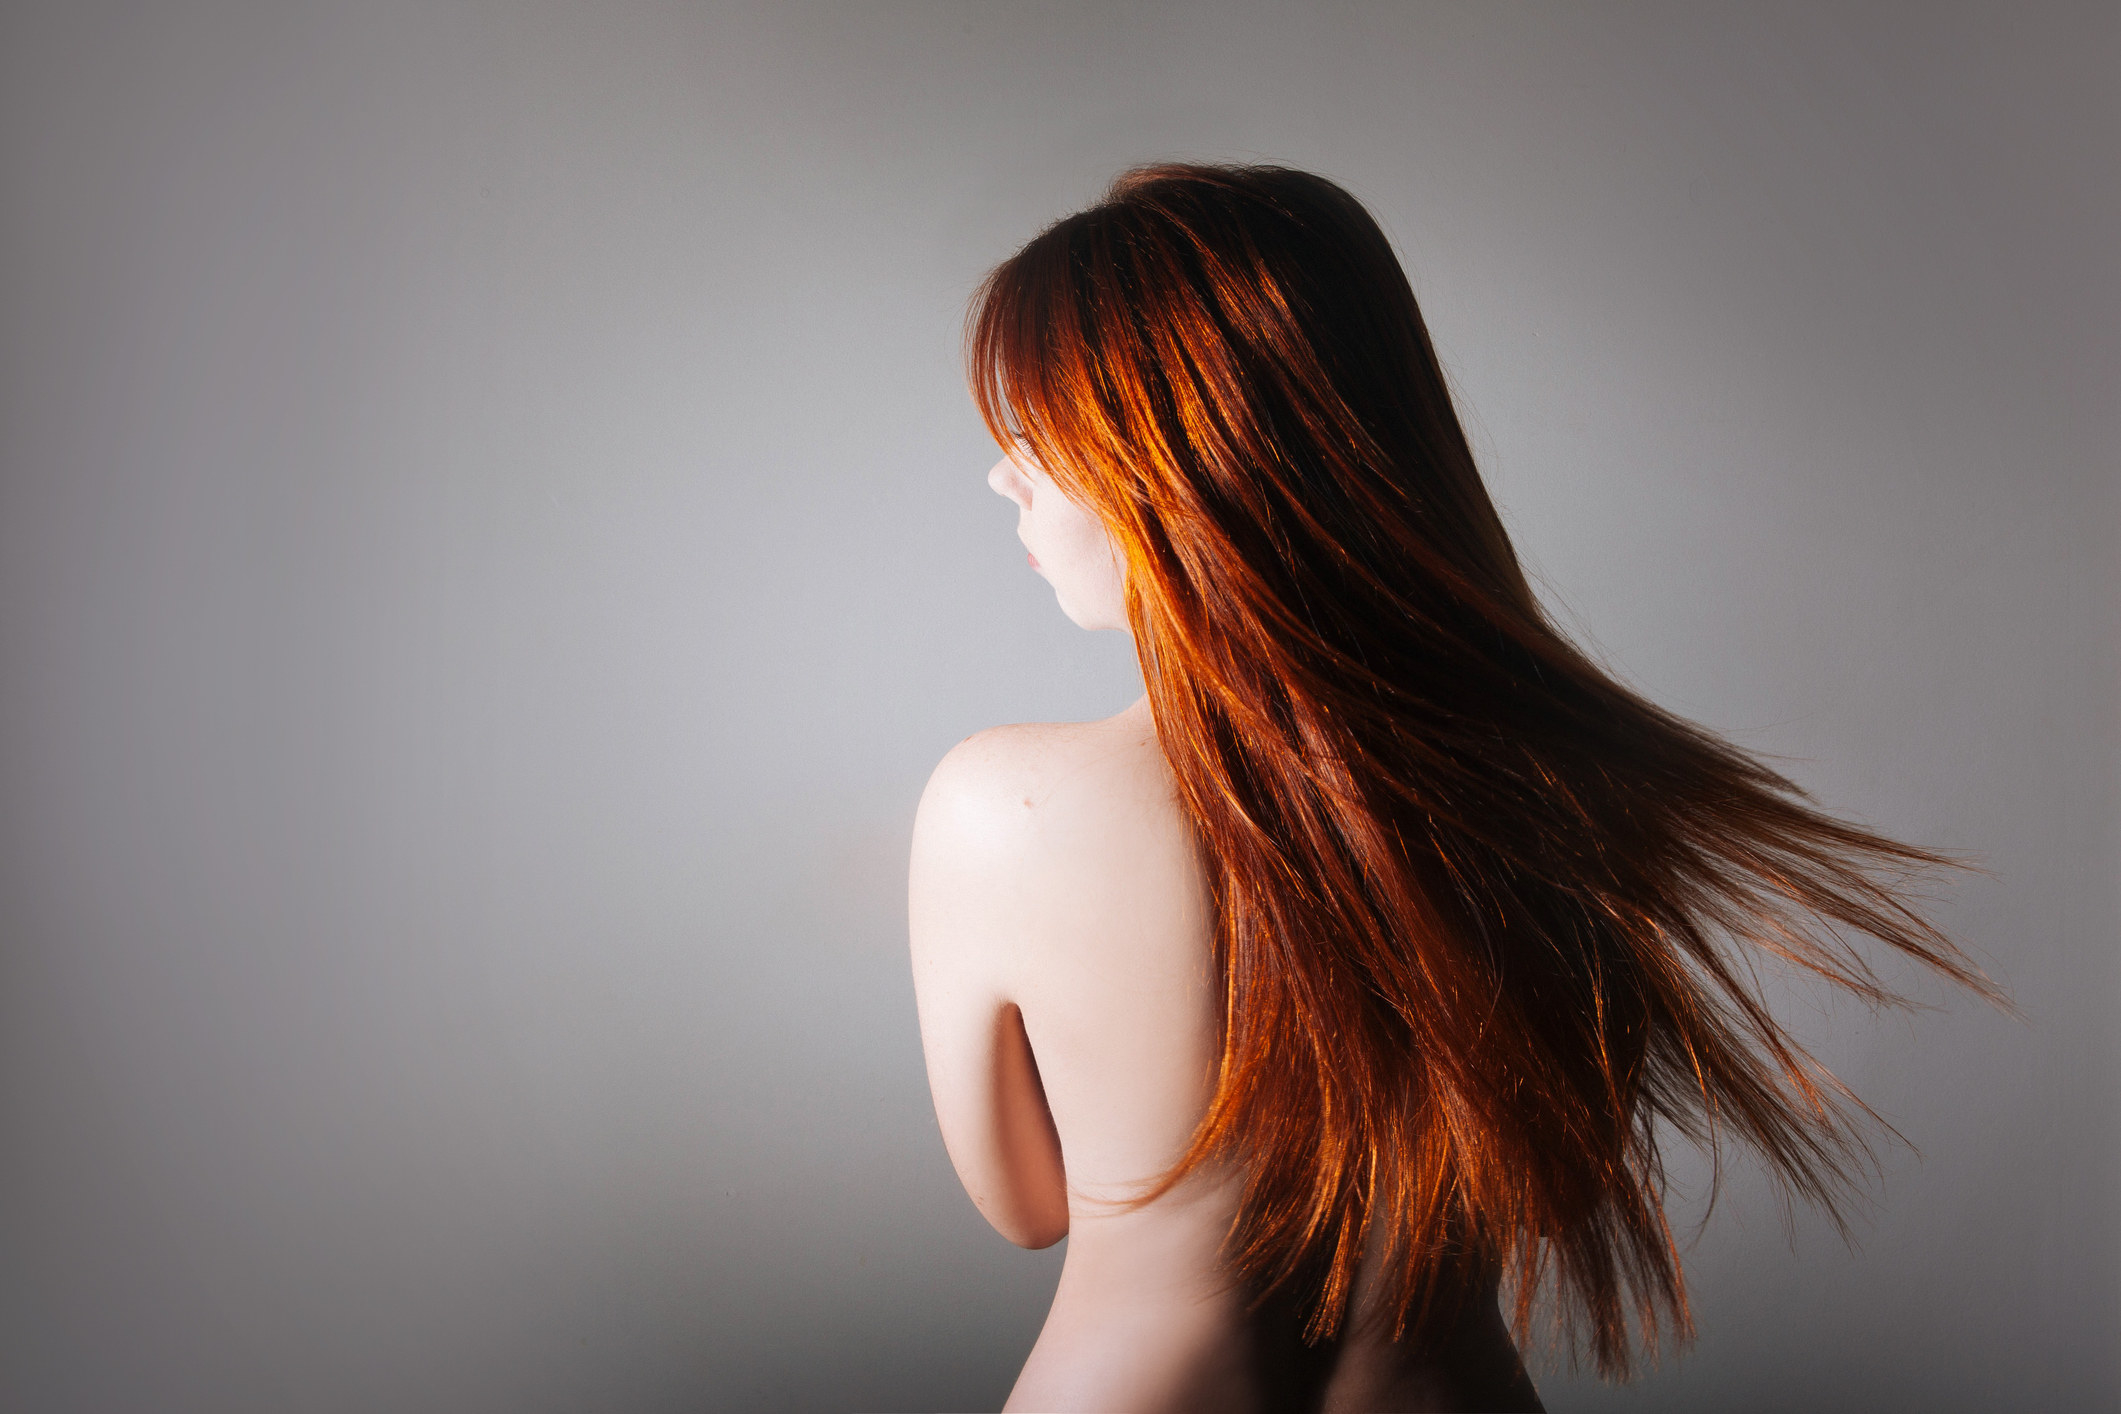 The bare back of a redheaded woman, showing her face in profile